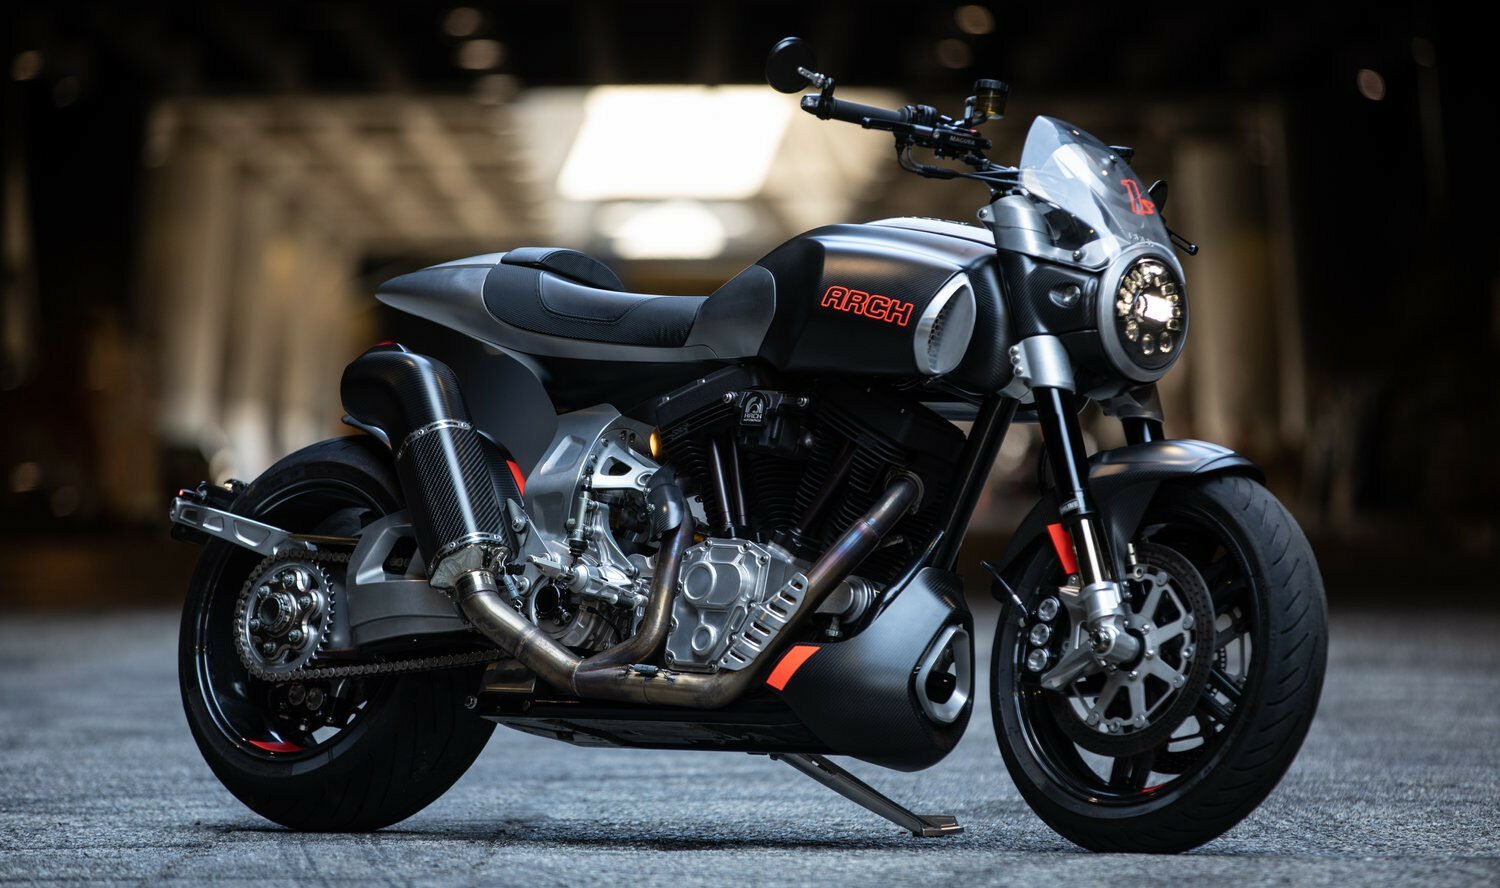 Arch Motorcycle's new 1s 